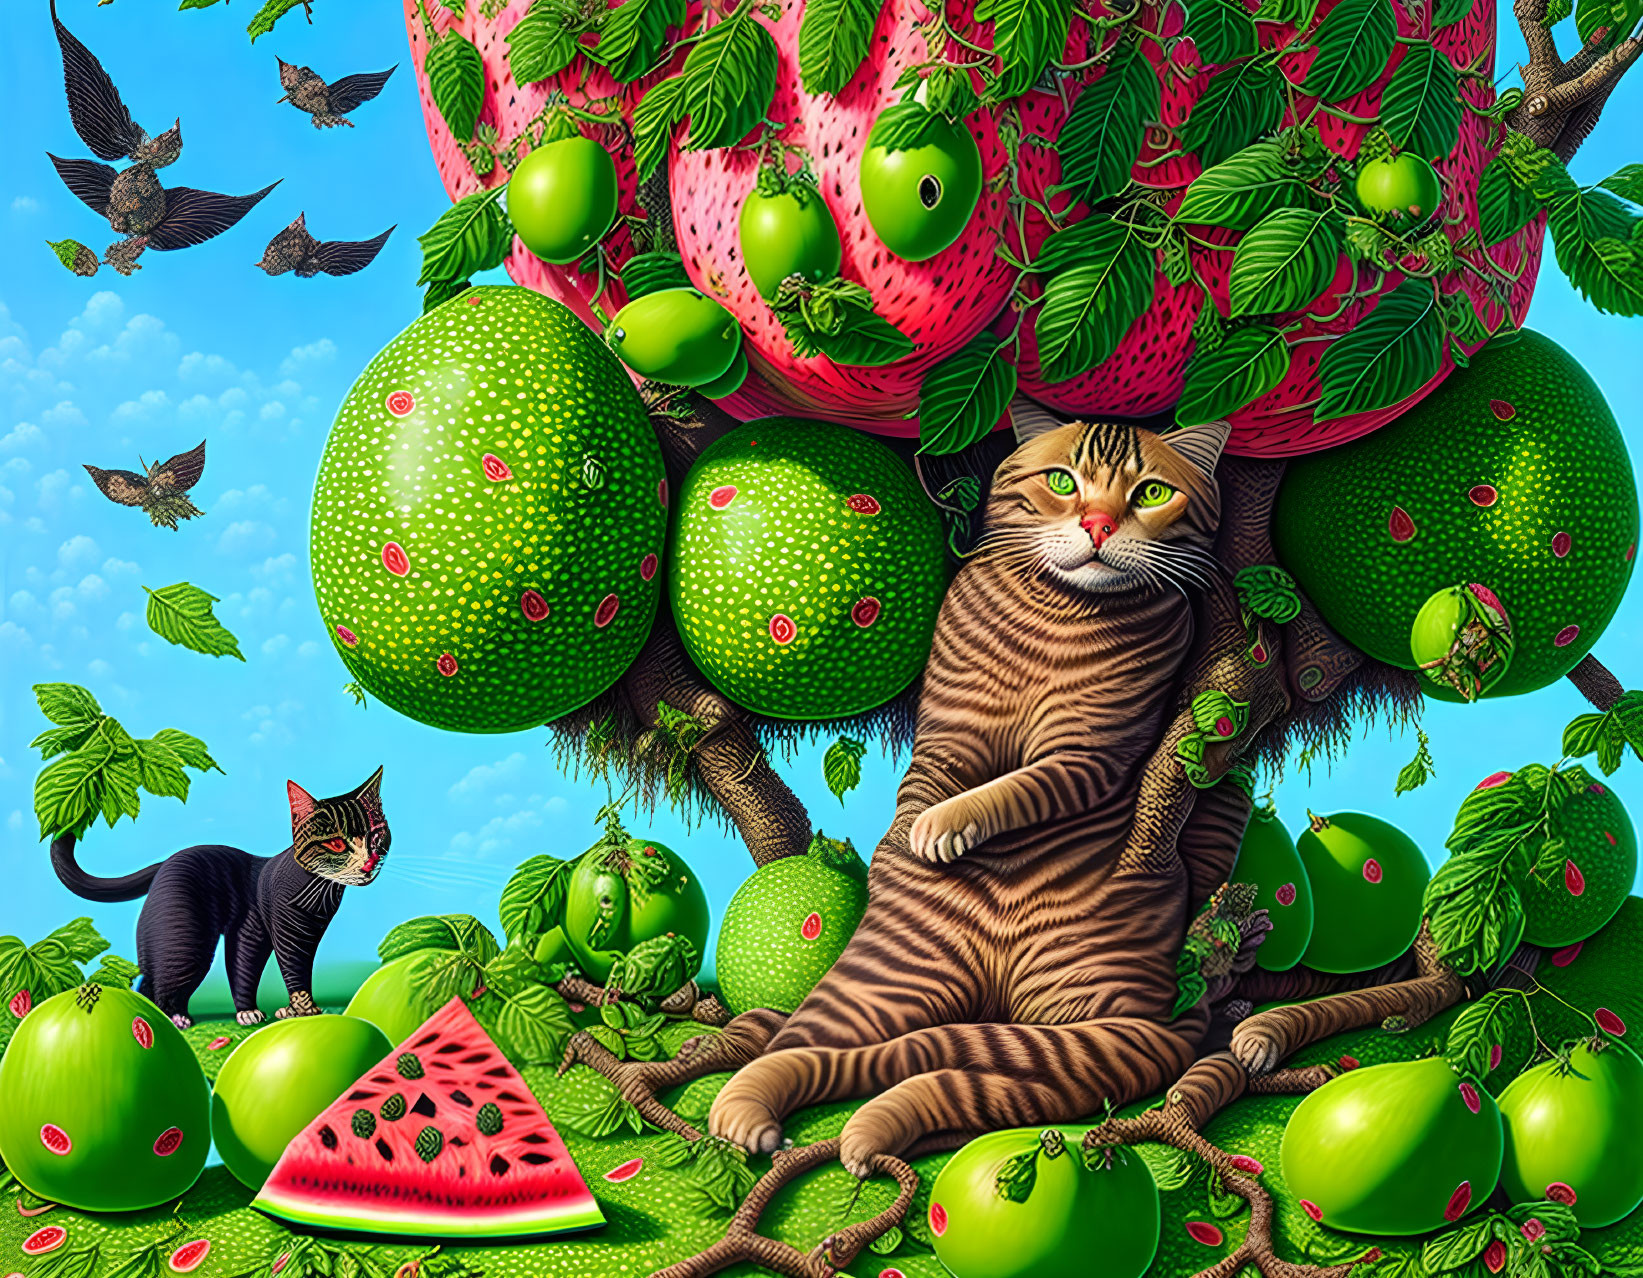 Surreal illustration of cats fused with fruits in a vibrant tree